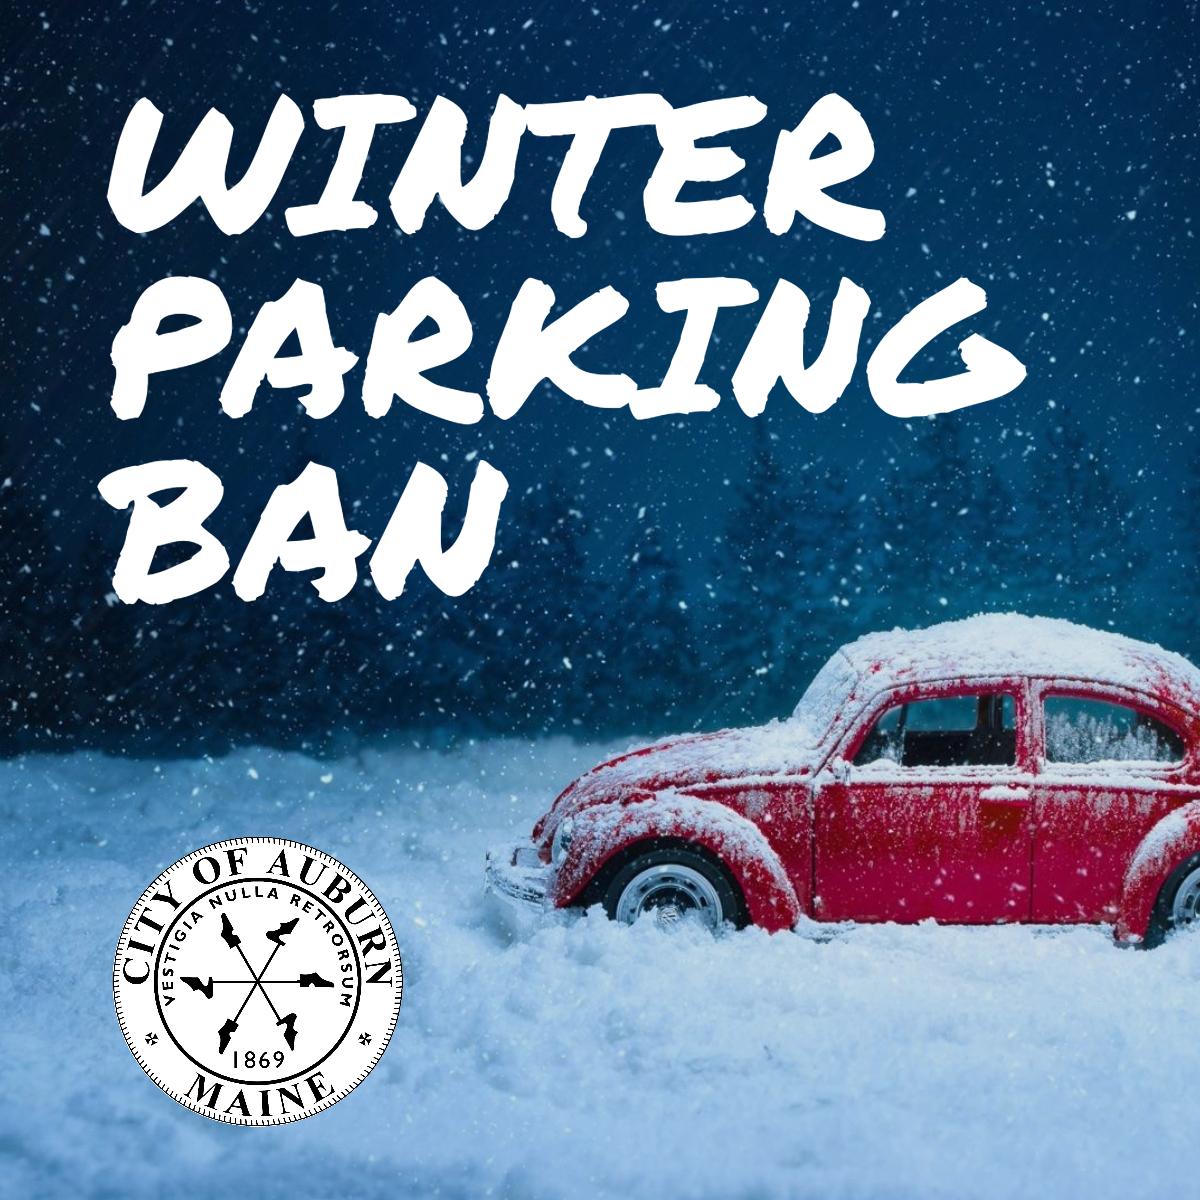 The City of Auburn will have its first WINTER PARKING BAN of the season tonight (12/3) from 9:00PM until noon tomorrow (12/4). To learn more about parking in Auburn, visit: auburnmaine.gov/pages/governme…